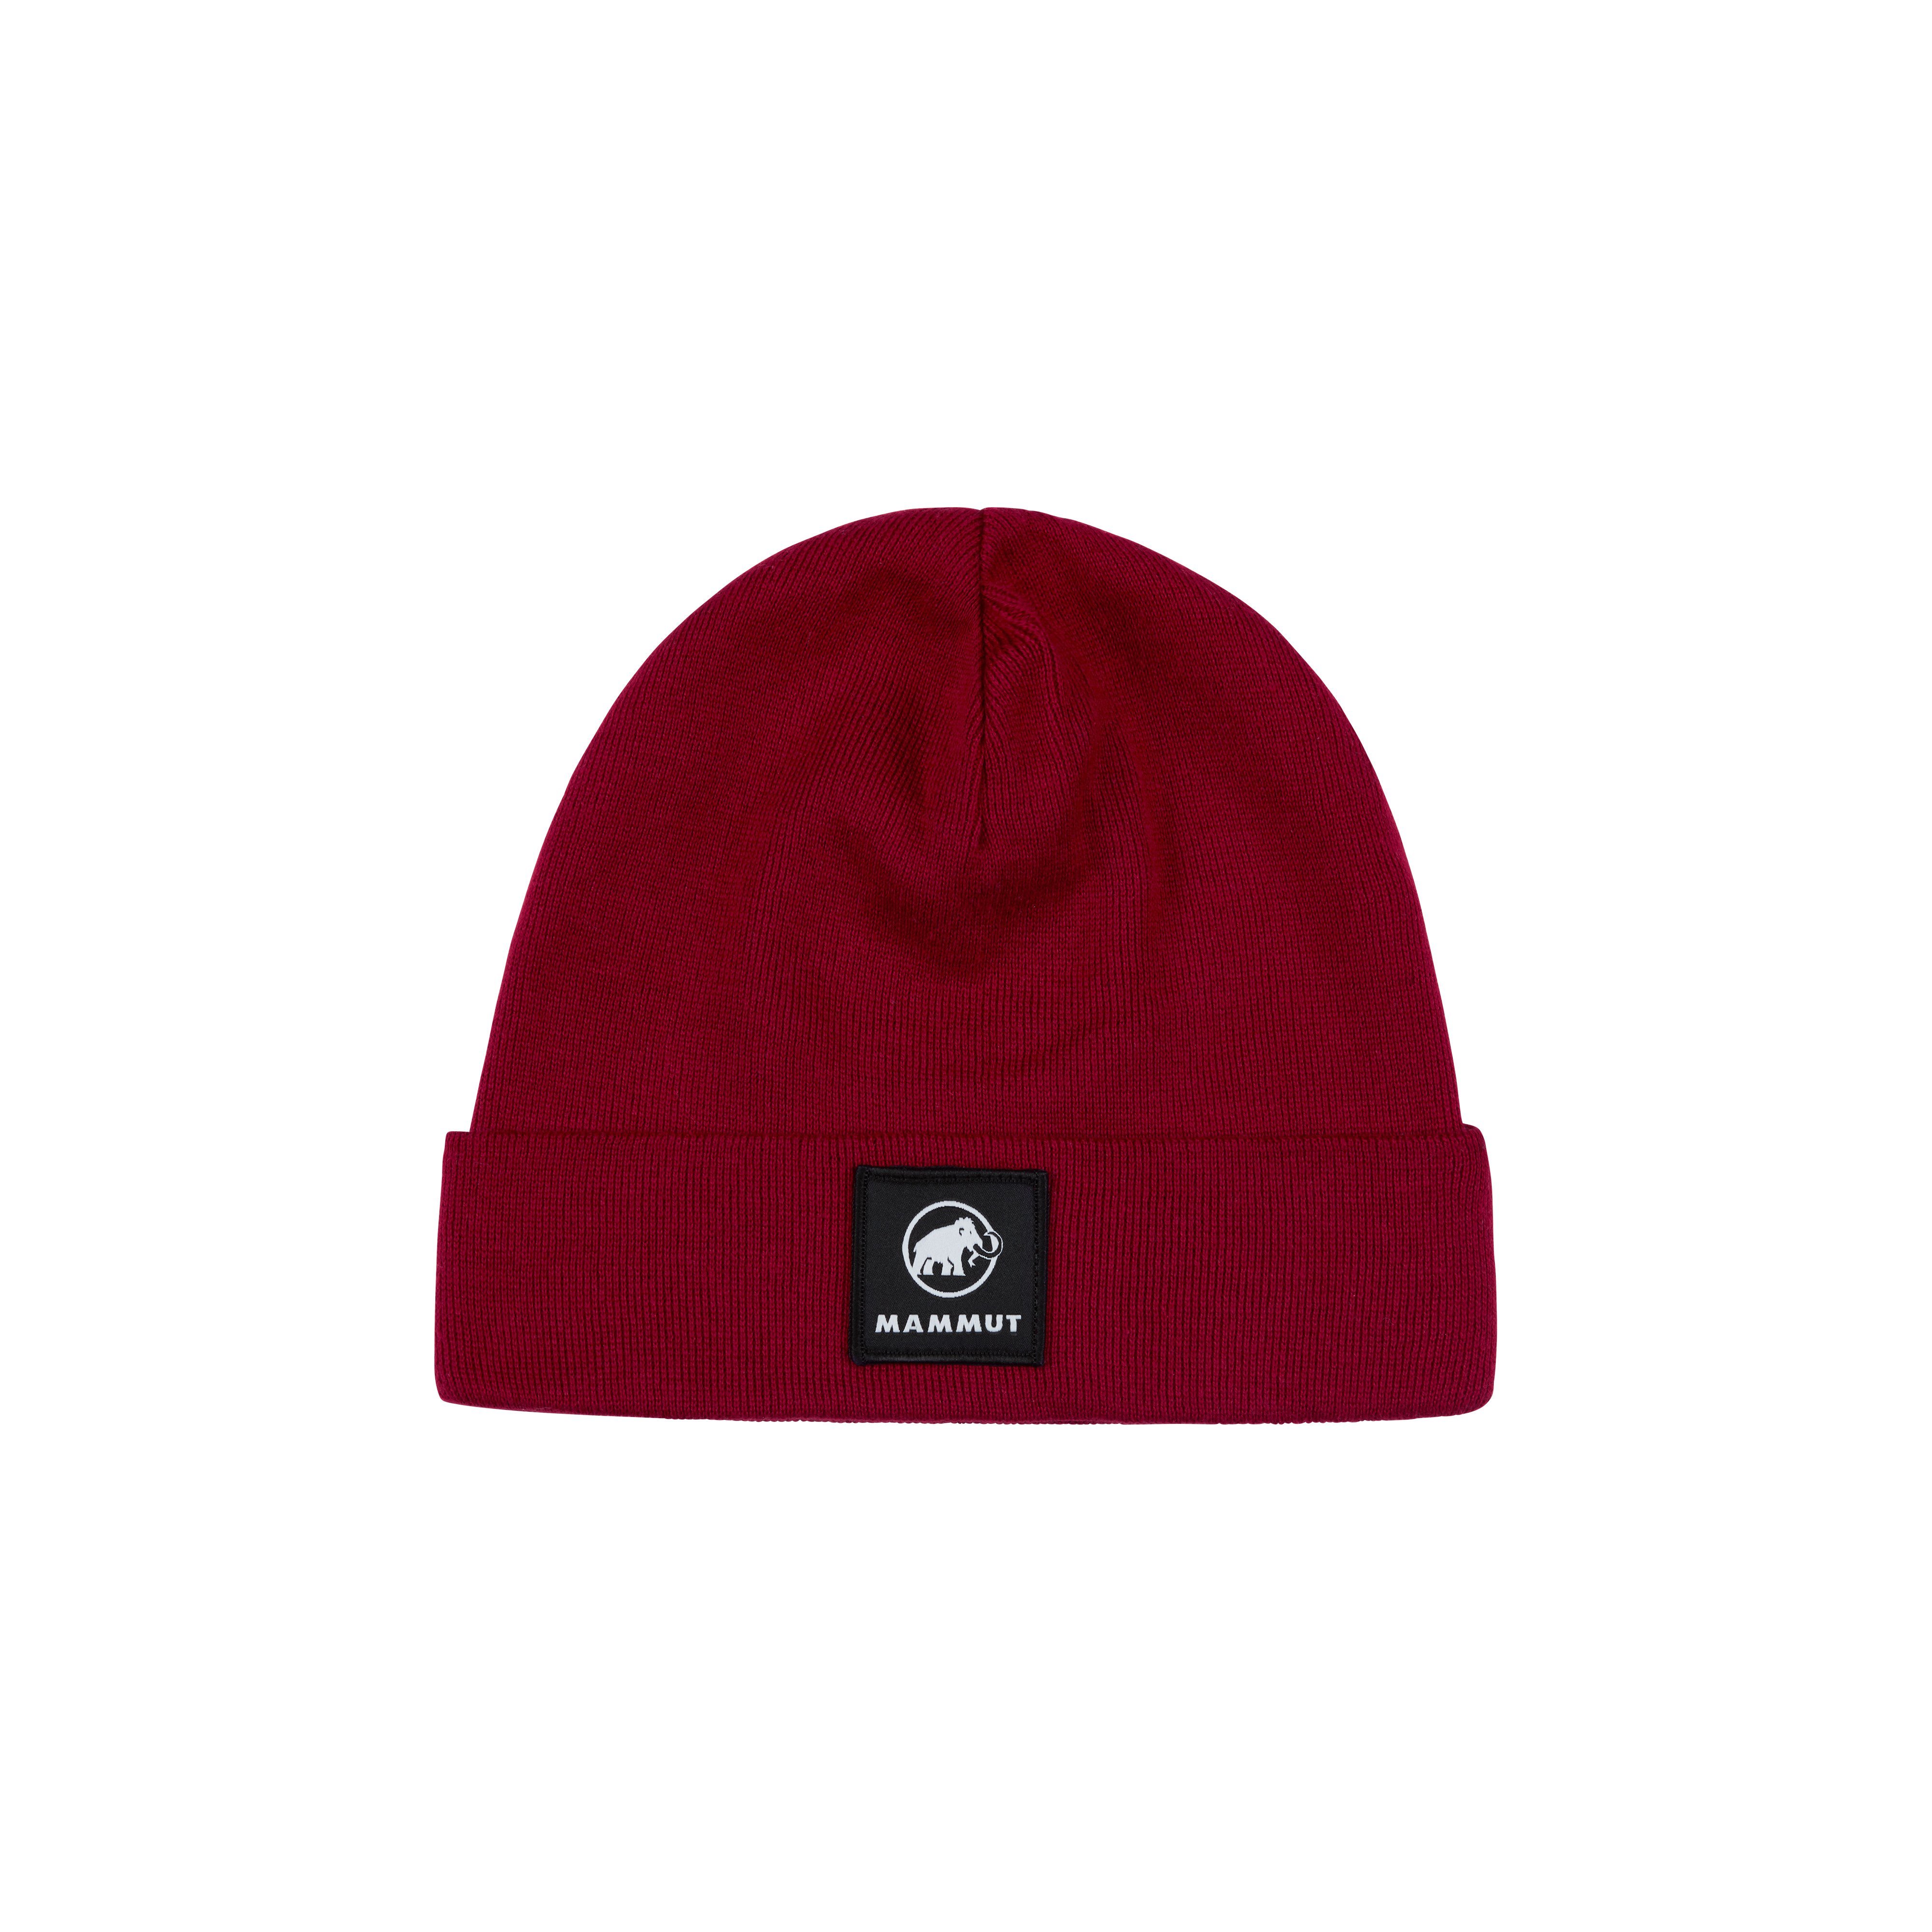 Fedoz Beanie - blood red, one size product image